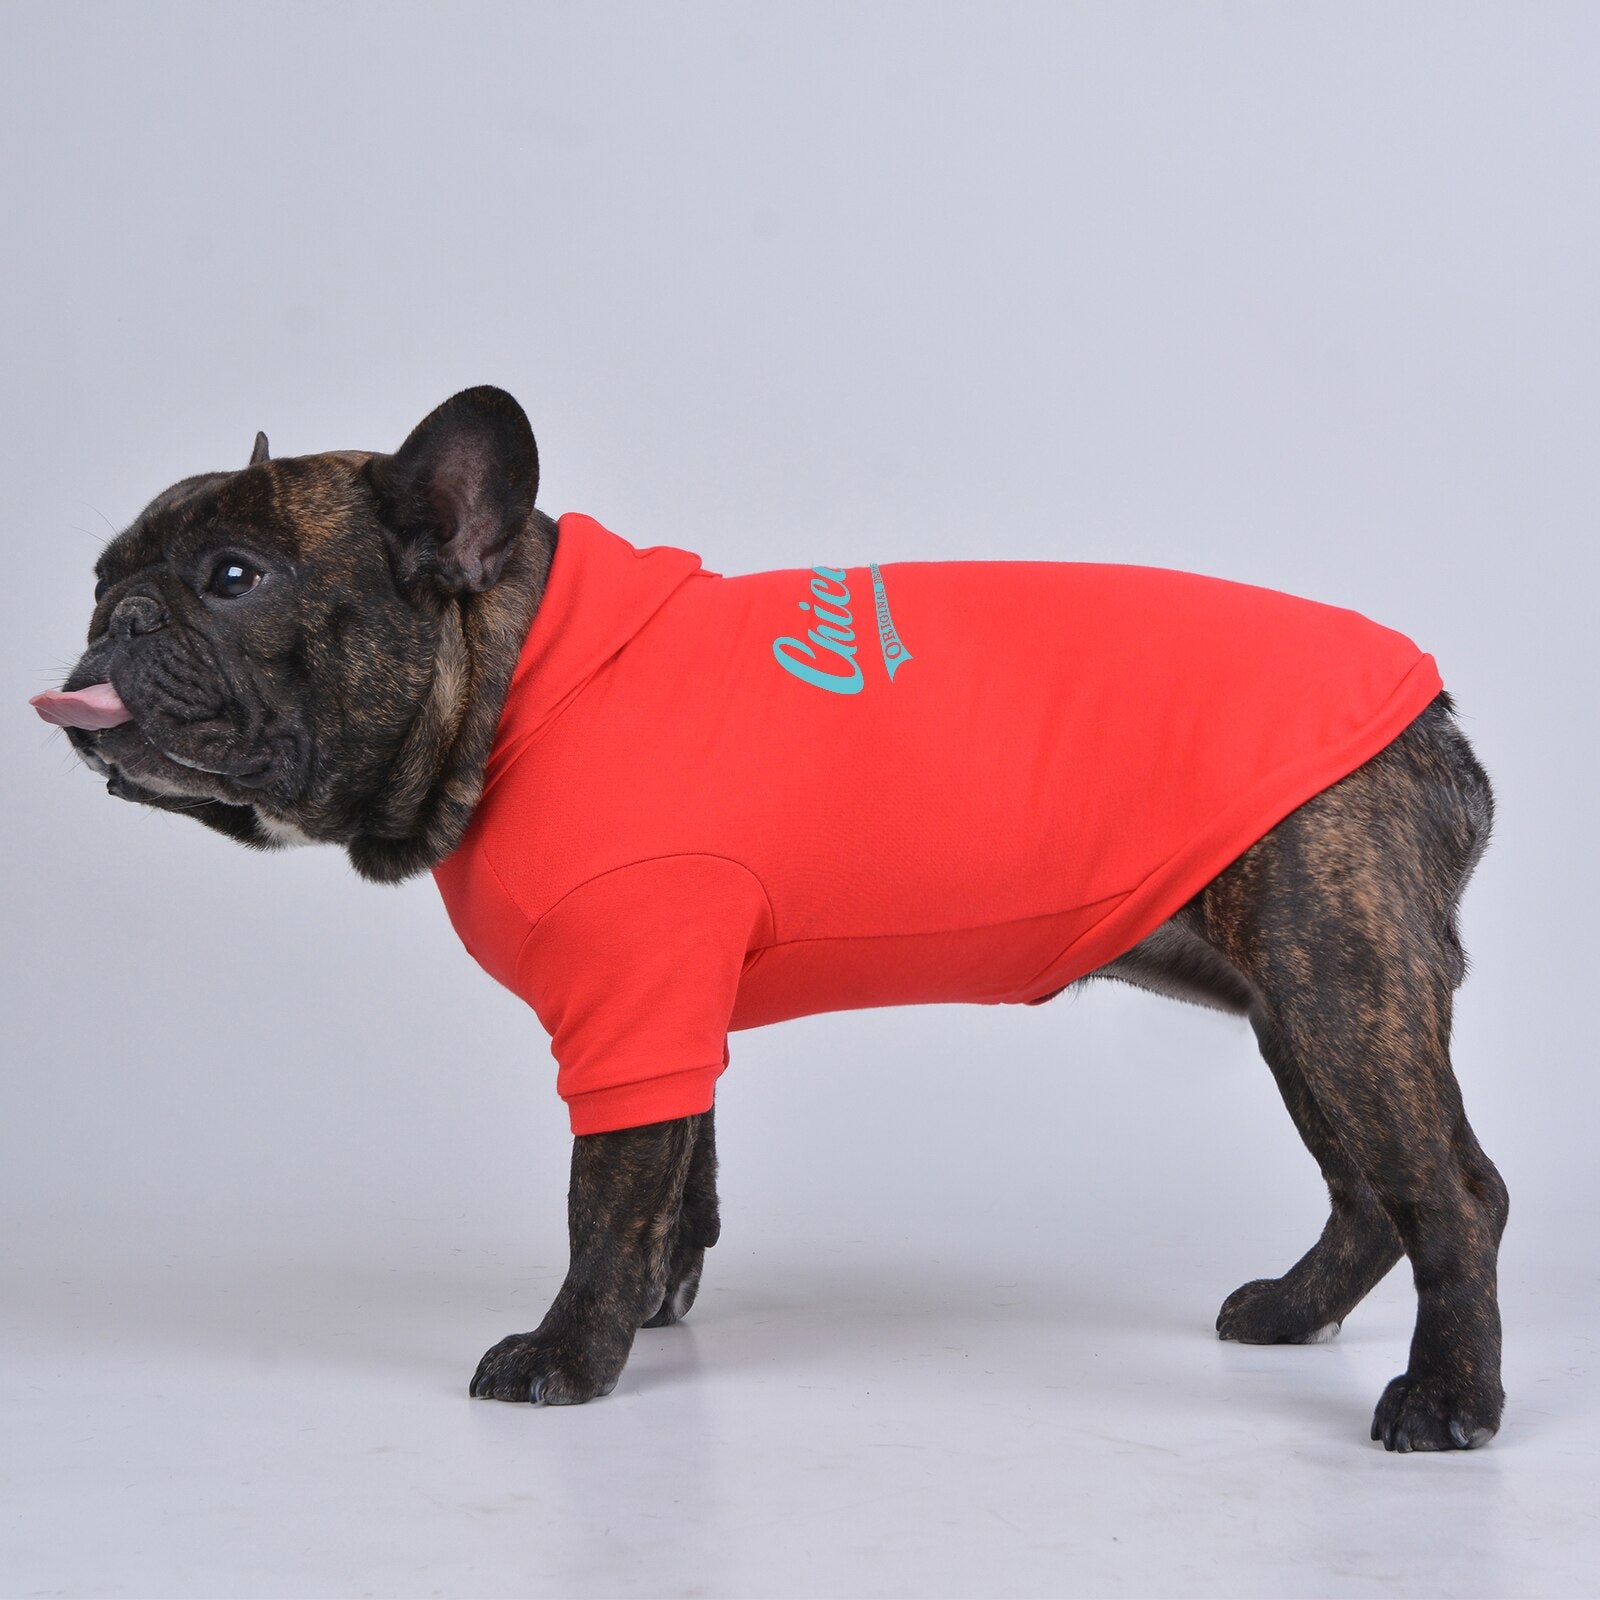 Hoodies for Dogs Small Medium Big Cat Pet， Leash Hole and Soft Warm Cotton Fabric, Suitable for Boys and Girls Puppies